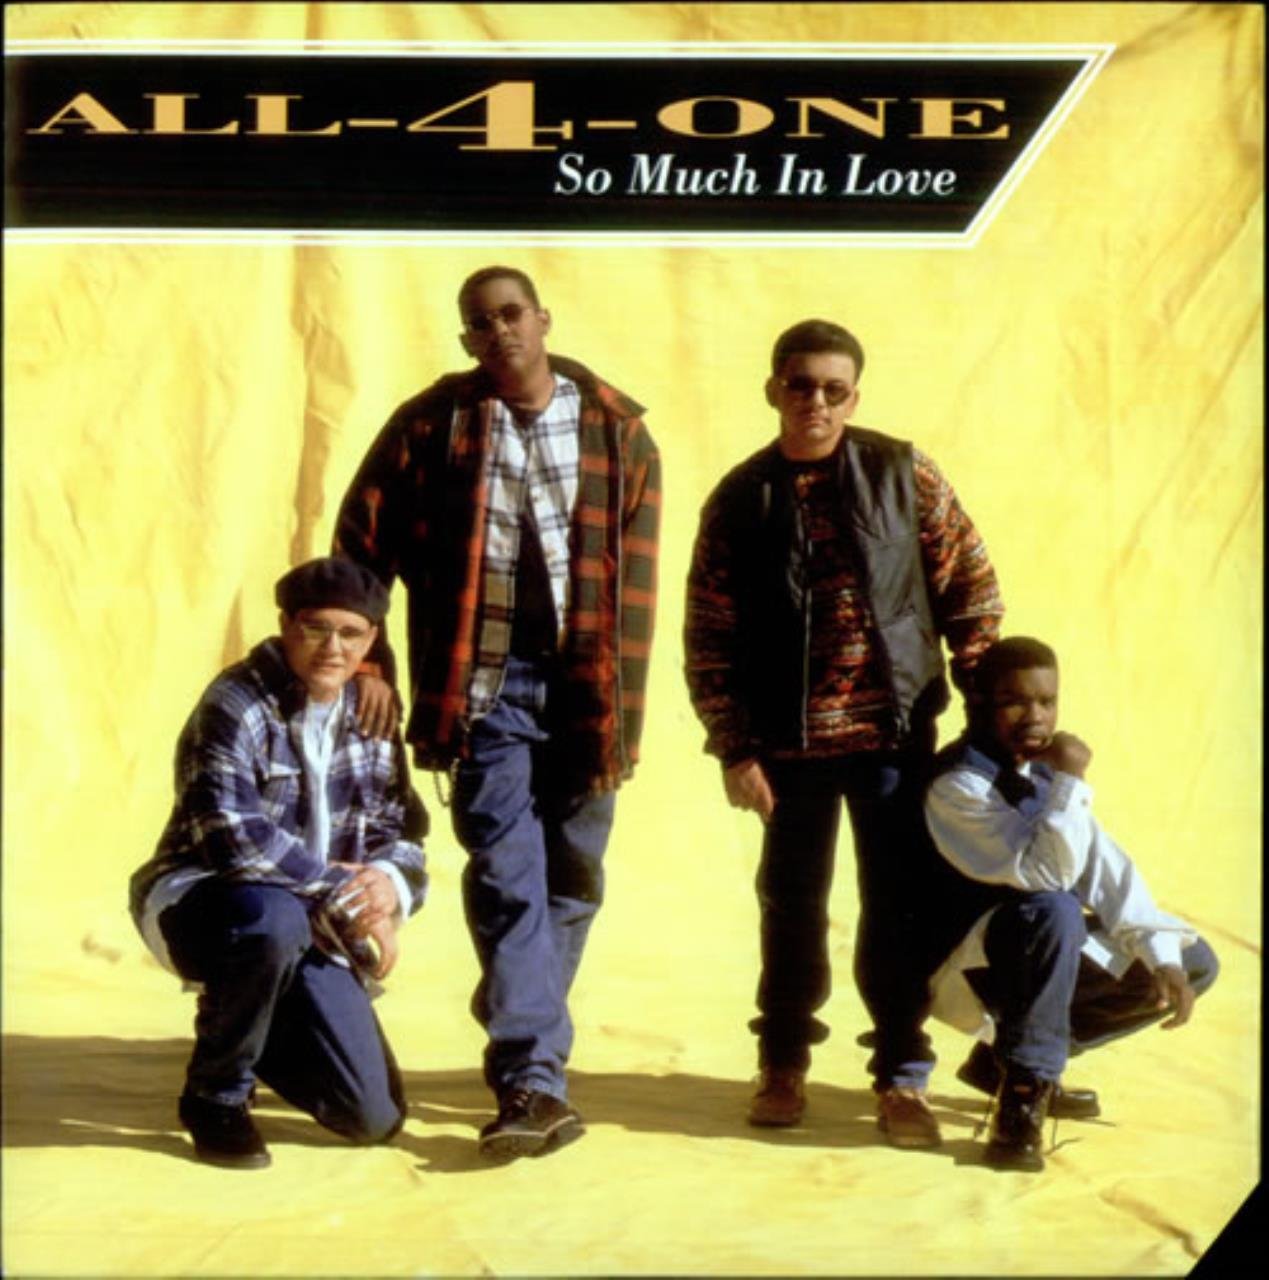 All-4-One – So Much In Love